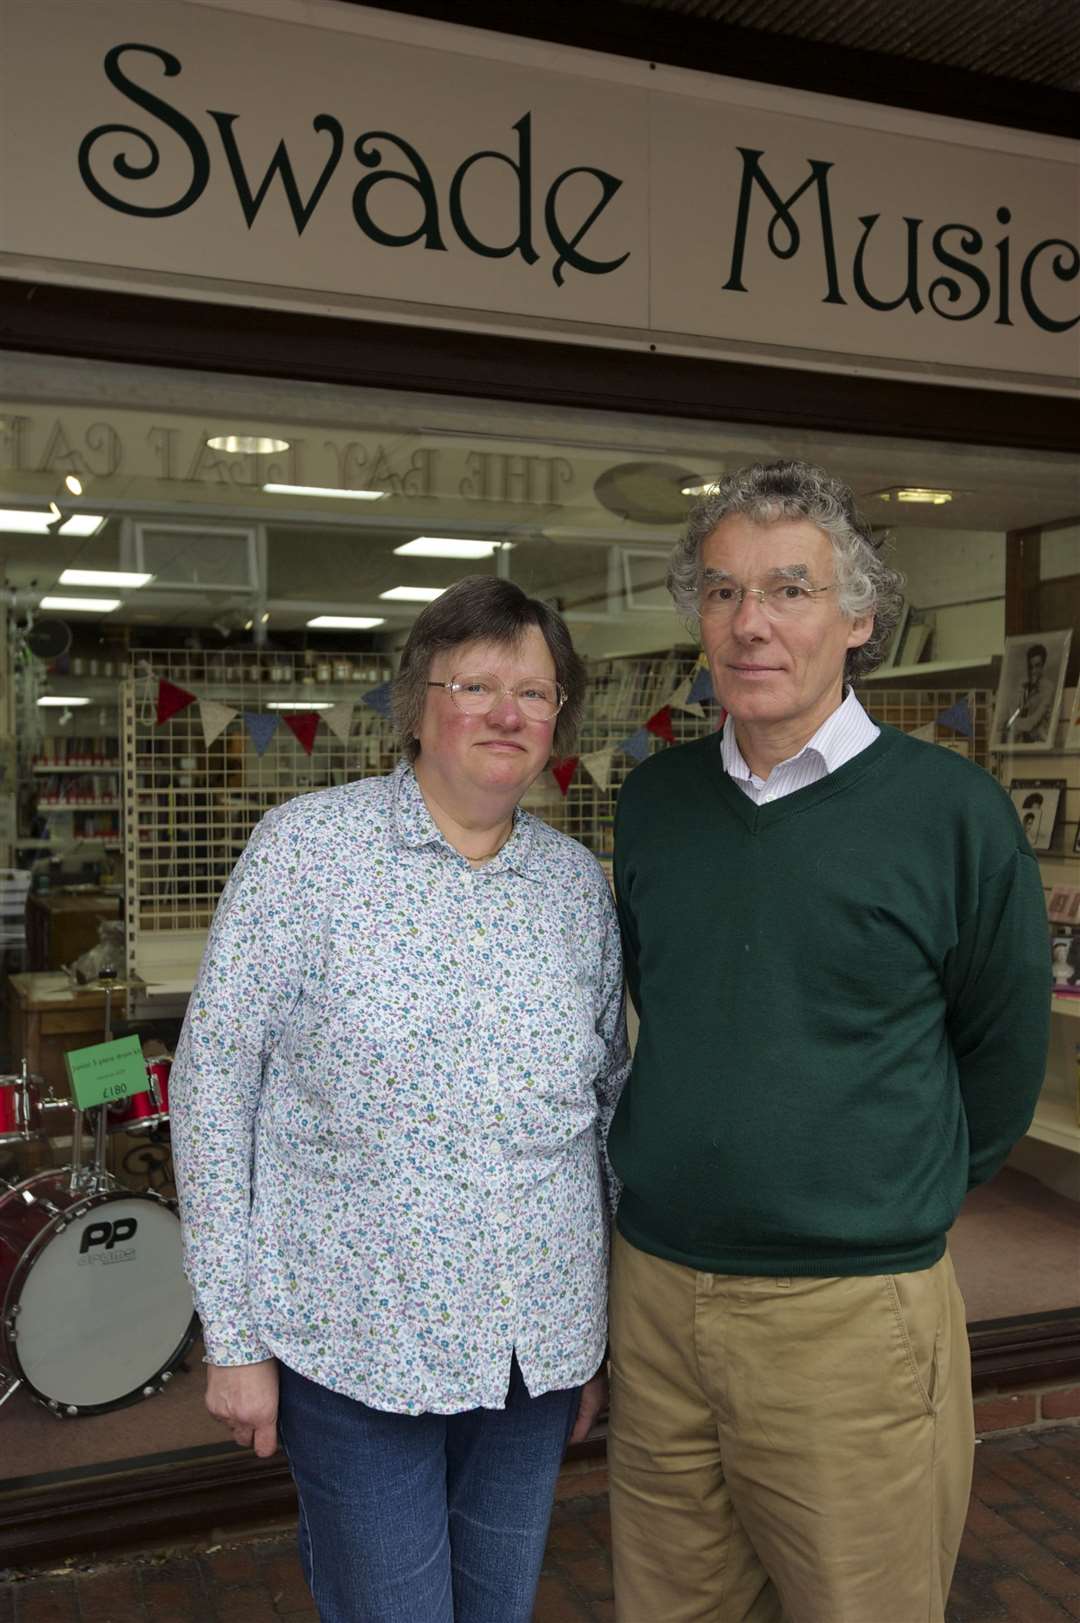 Robert and Cynthia Swade, of Swade Music, Roman Square, Sittingbourne. Picture: Andy Payton